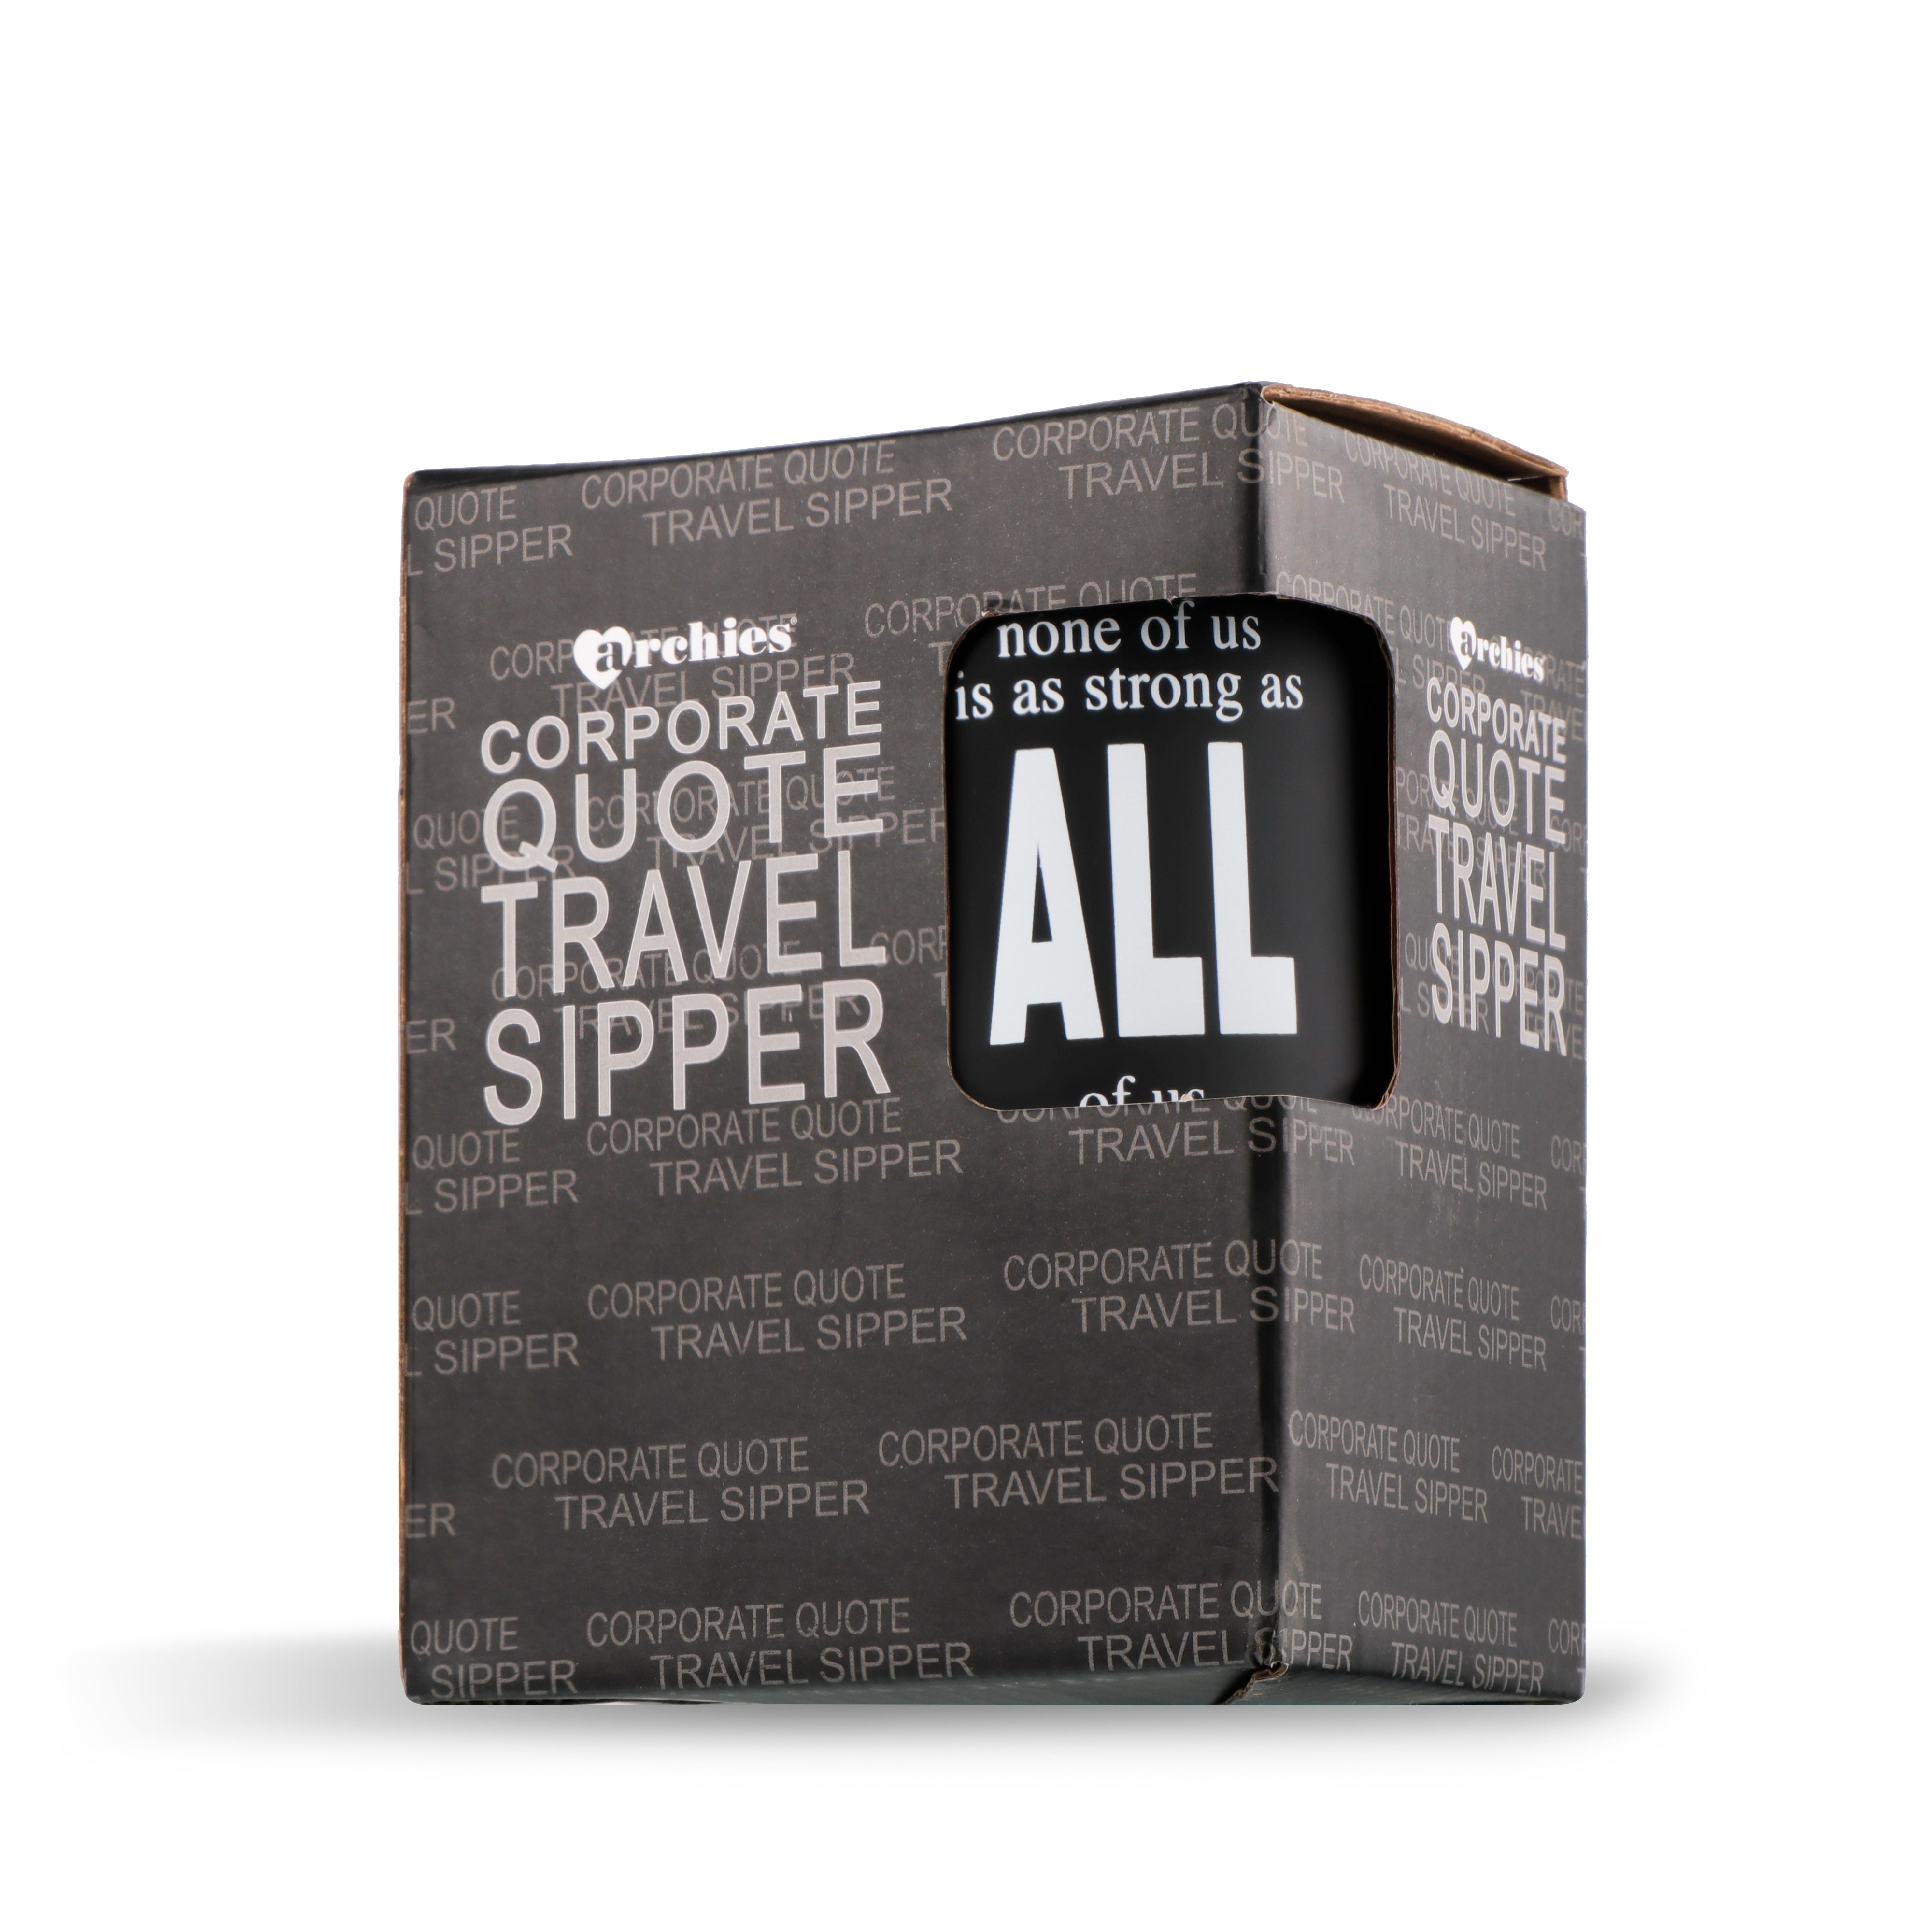 Archies | Archies Printed Hard PrasticTravel Sipper & Notebook combo  with Corporate Quote Theme 3